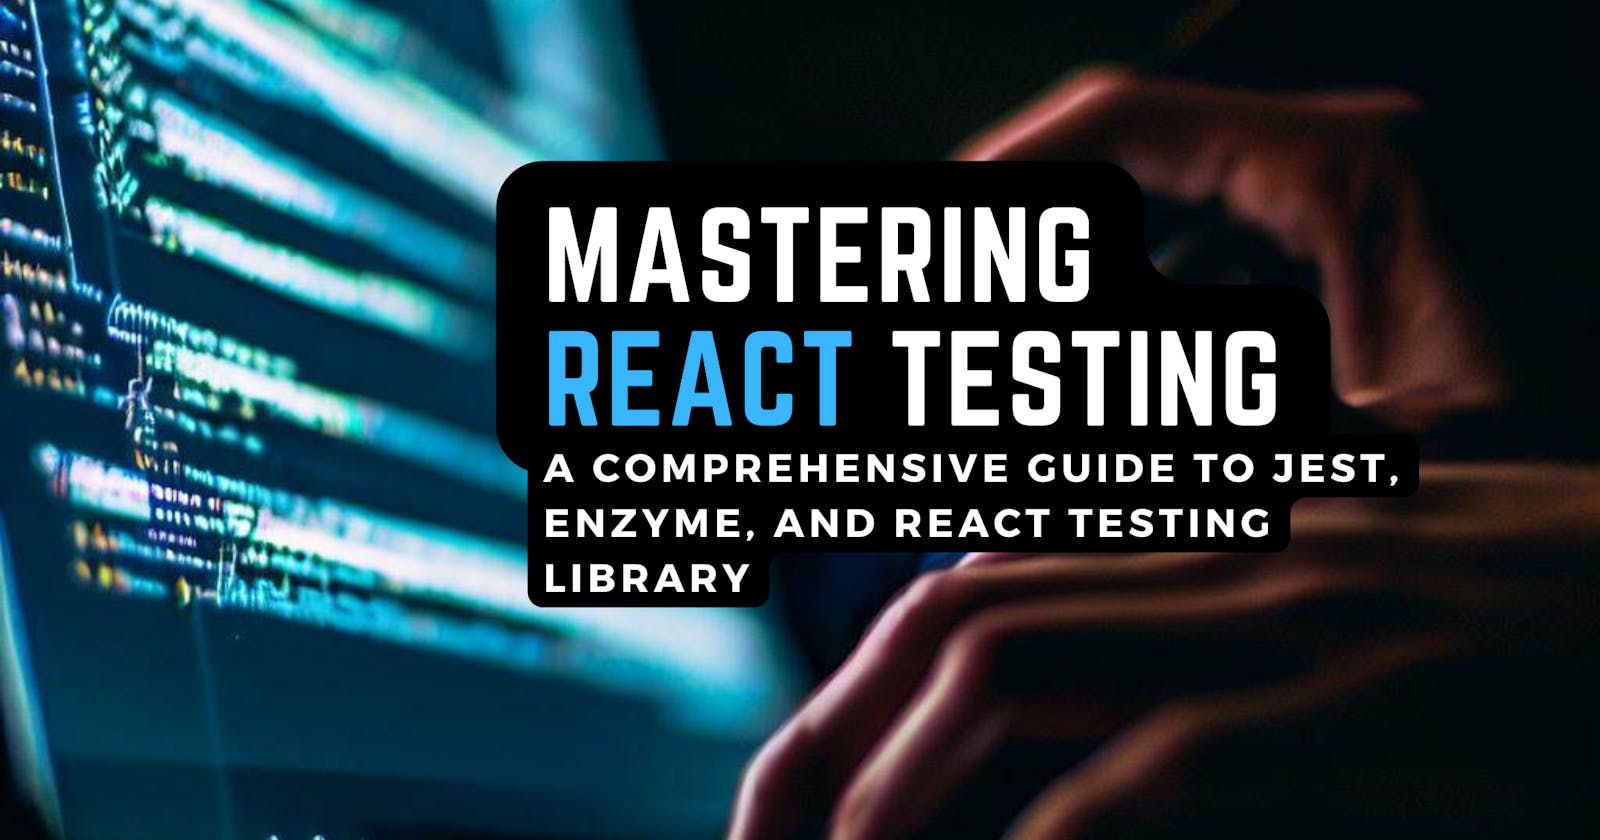 Mastering React Testing: A Comprehensive Guide to Jest, Enzyme, and React Testing Library